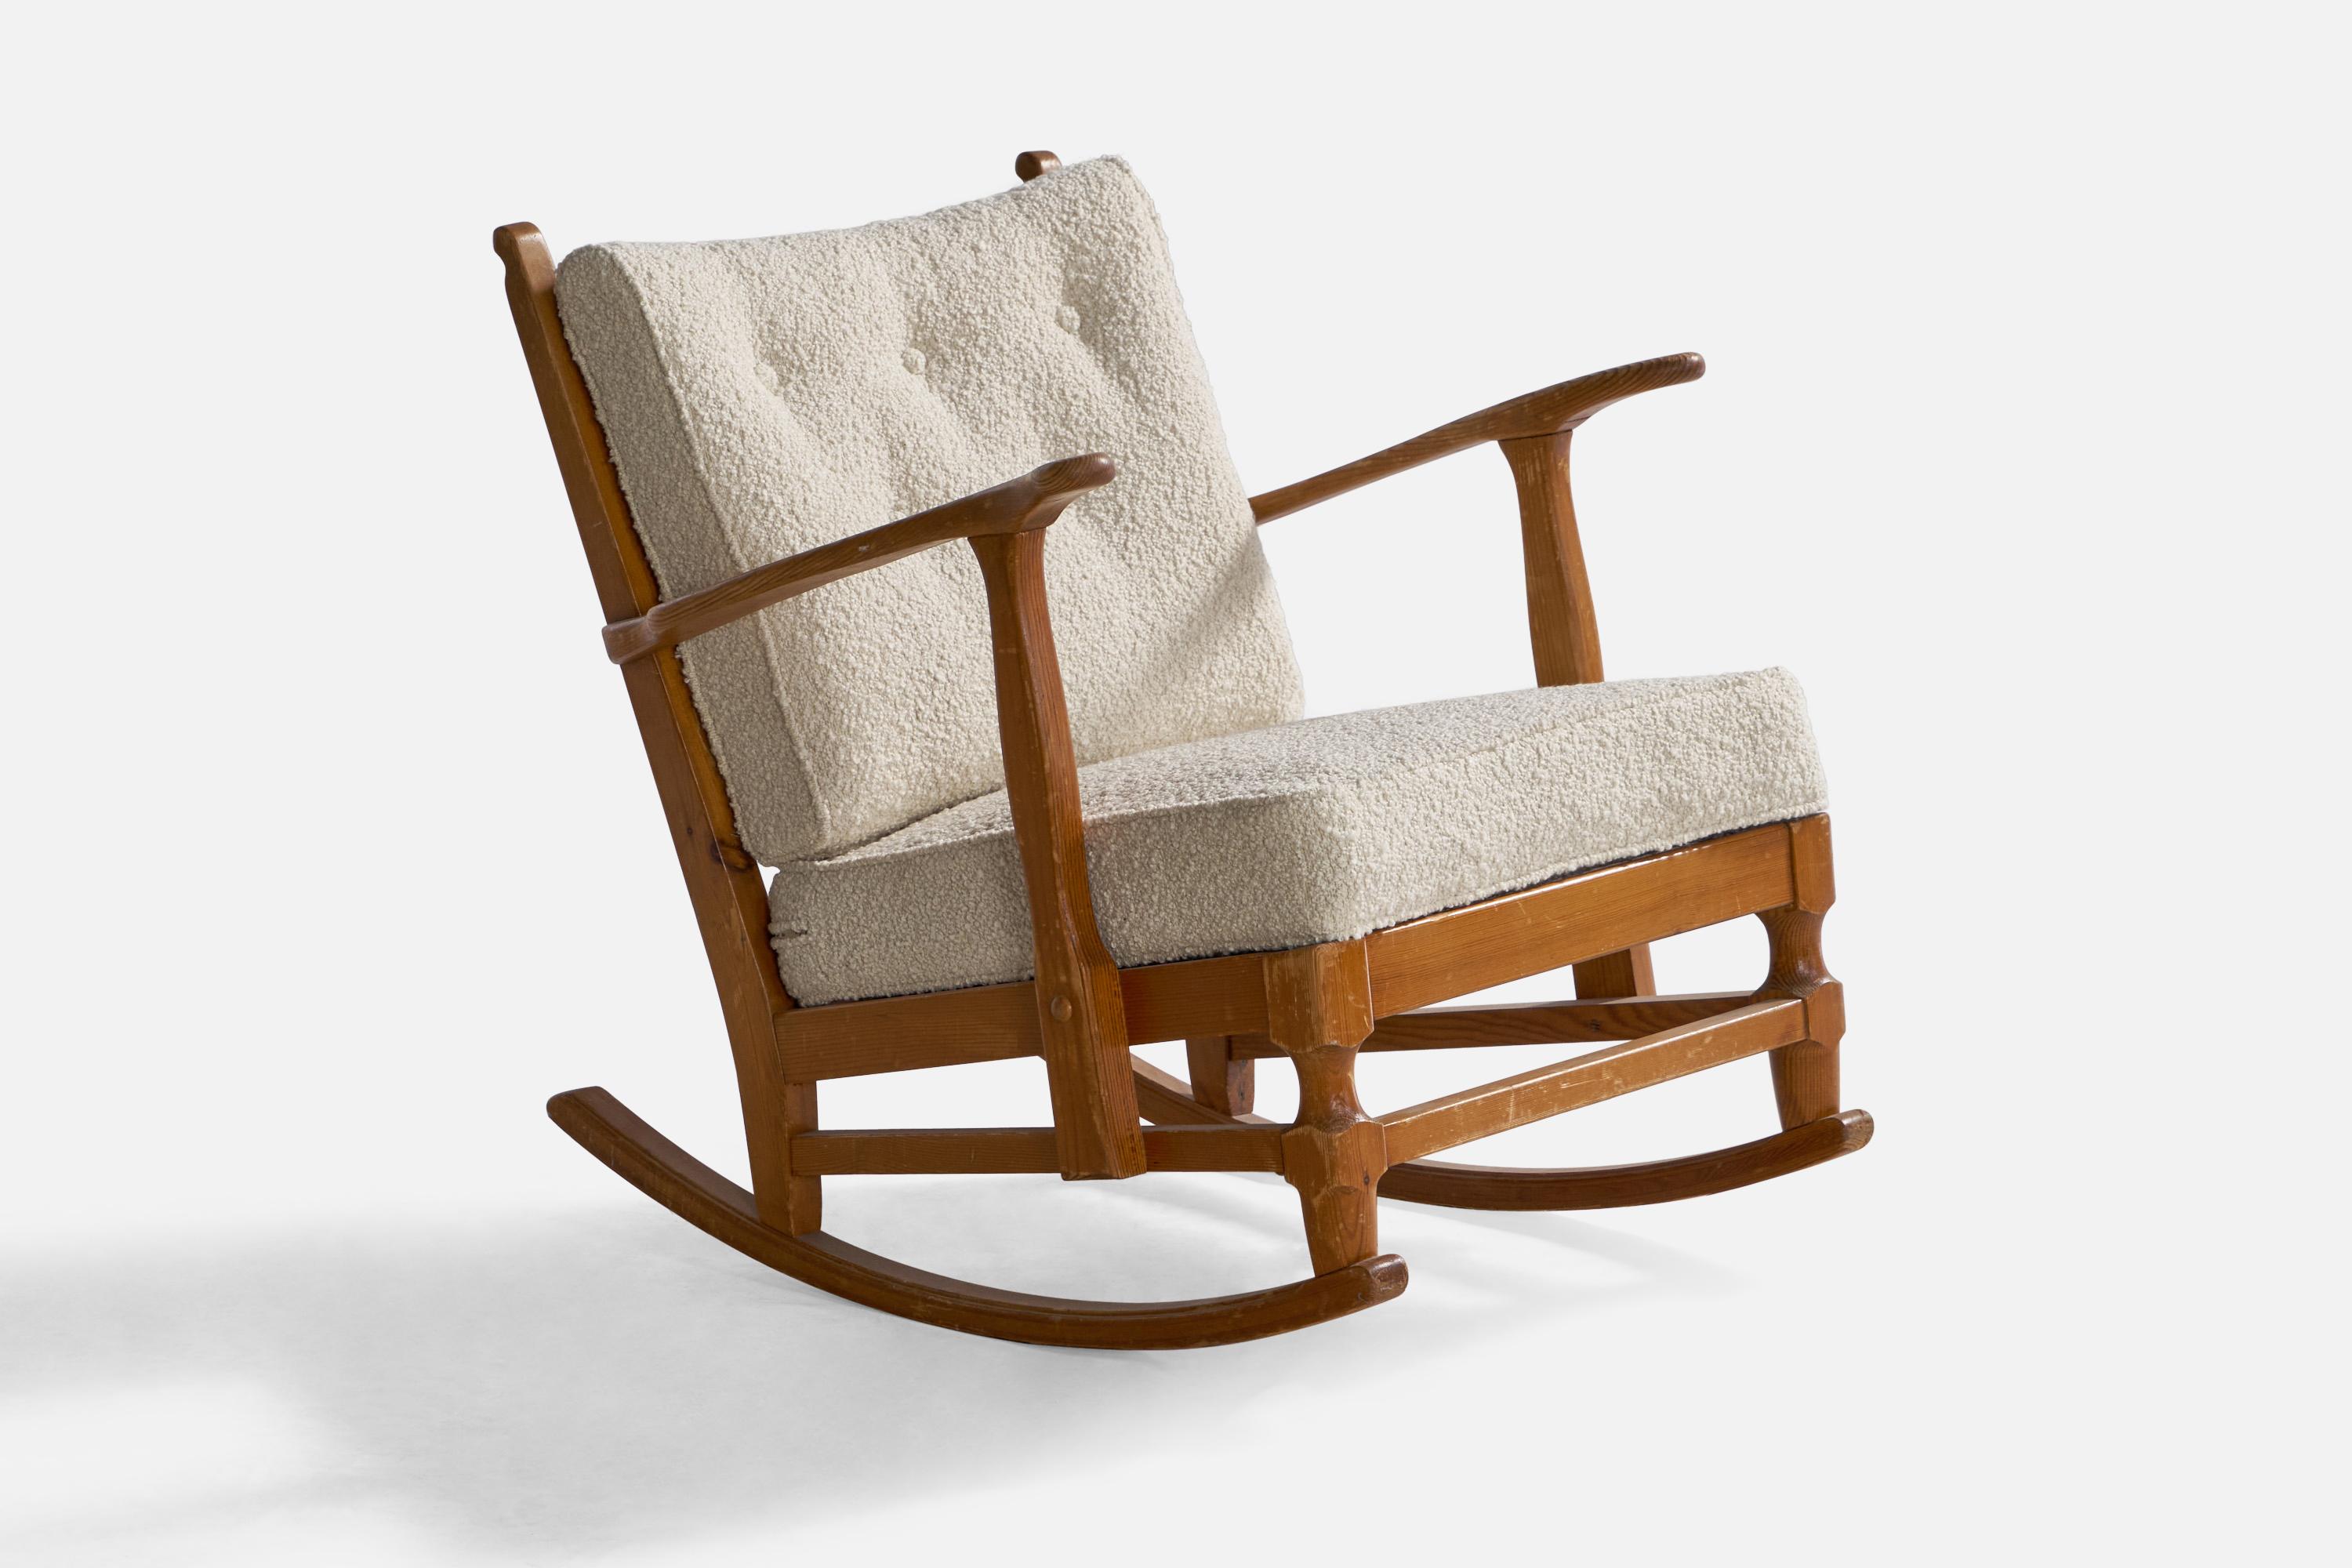 A pine and white fabric rocking lounge chair produced by Göperts möbler, Sweden, 1940s.

Seat height: 15.75”